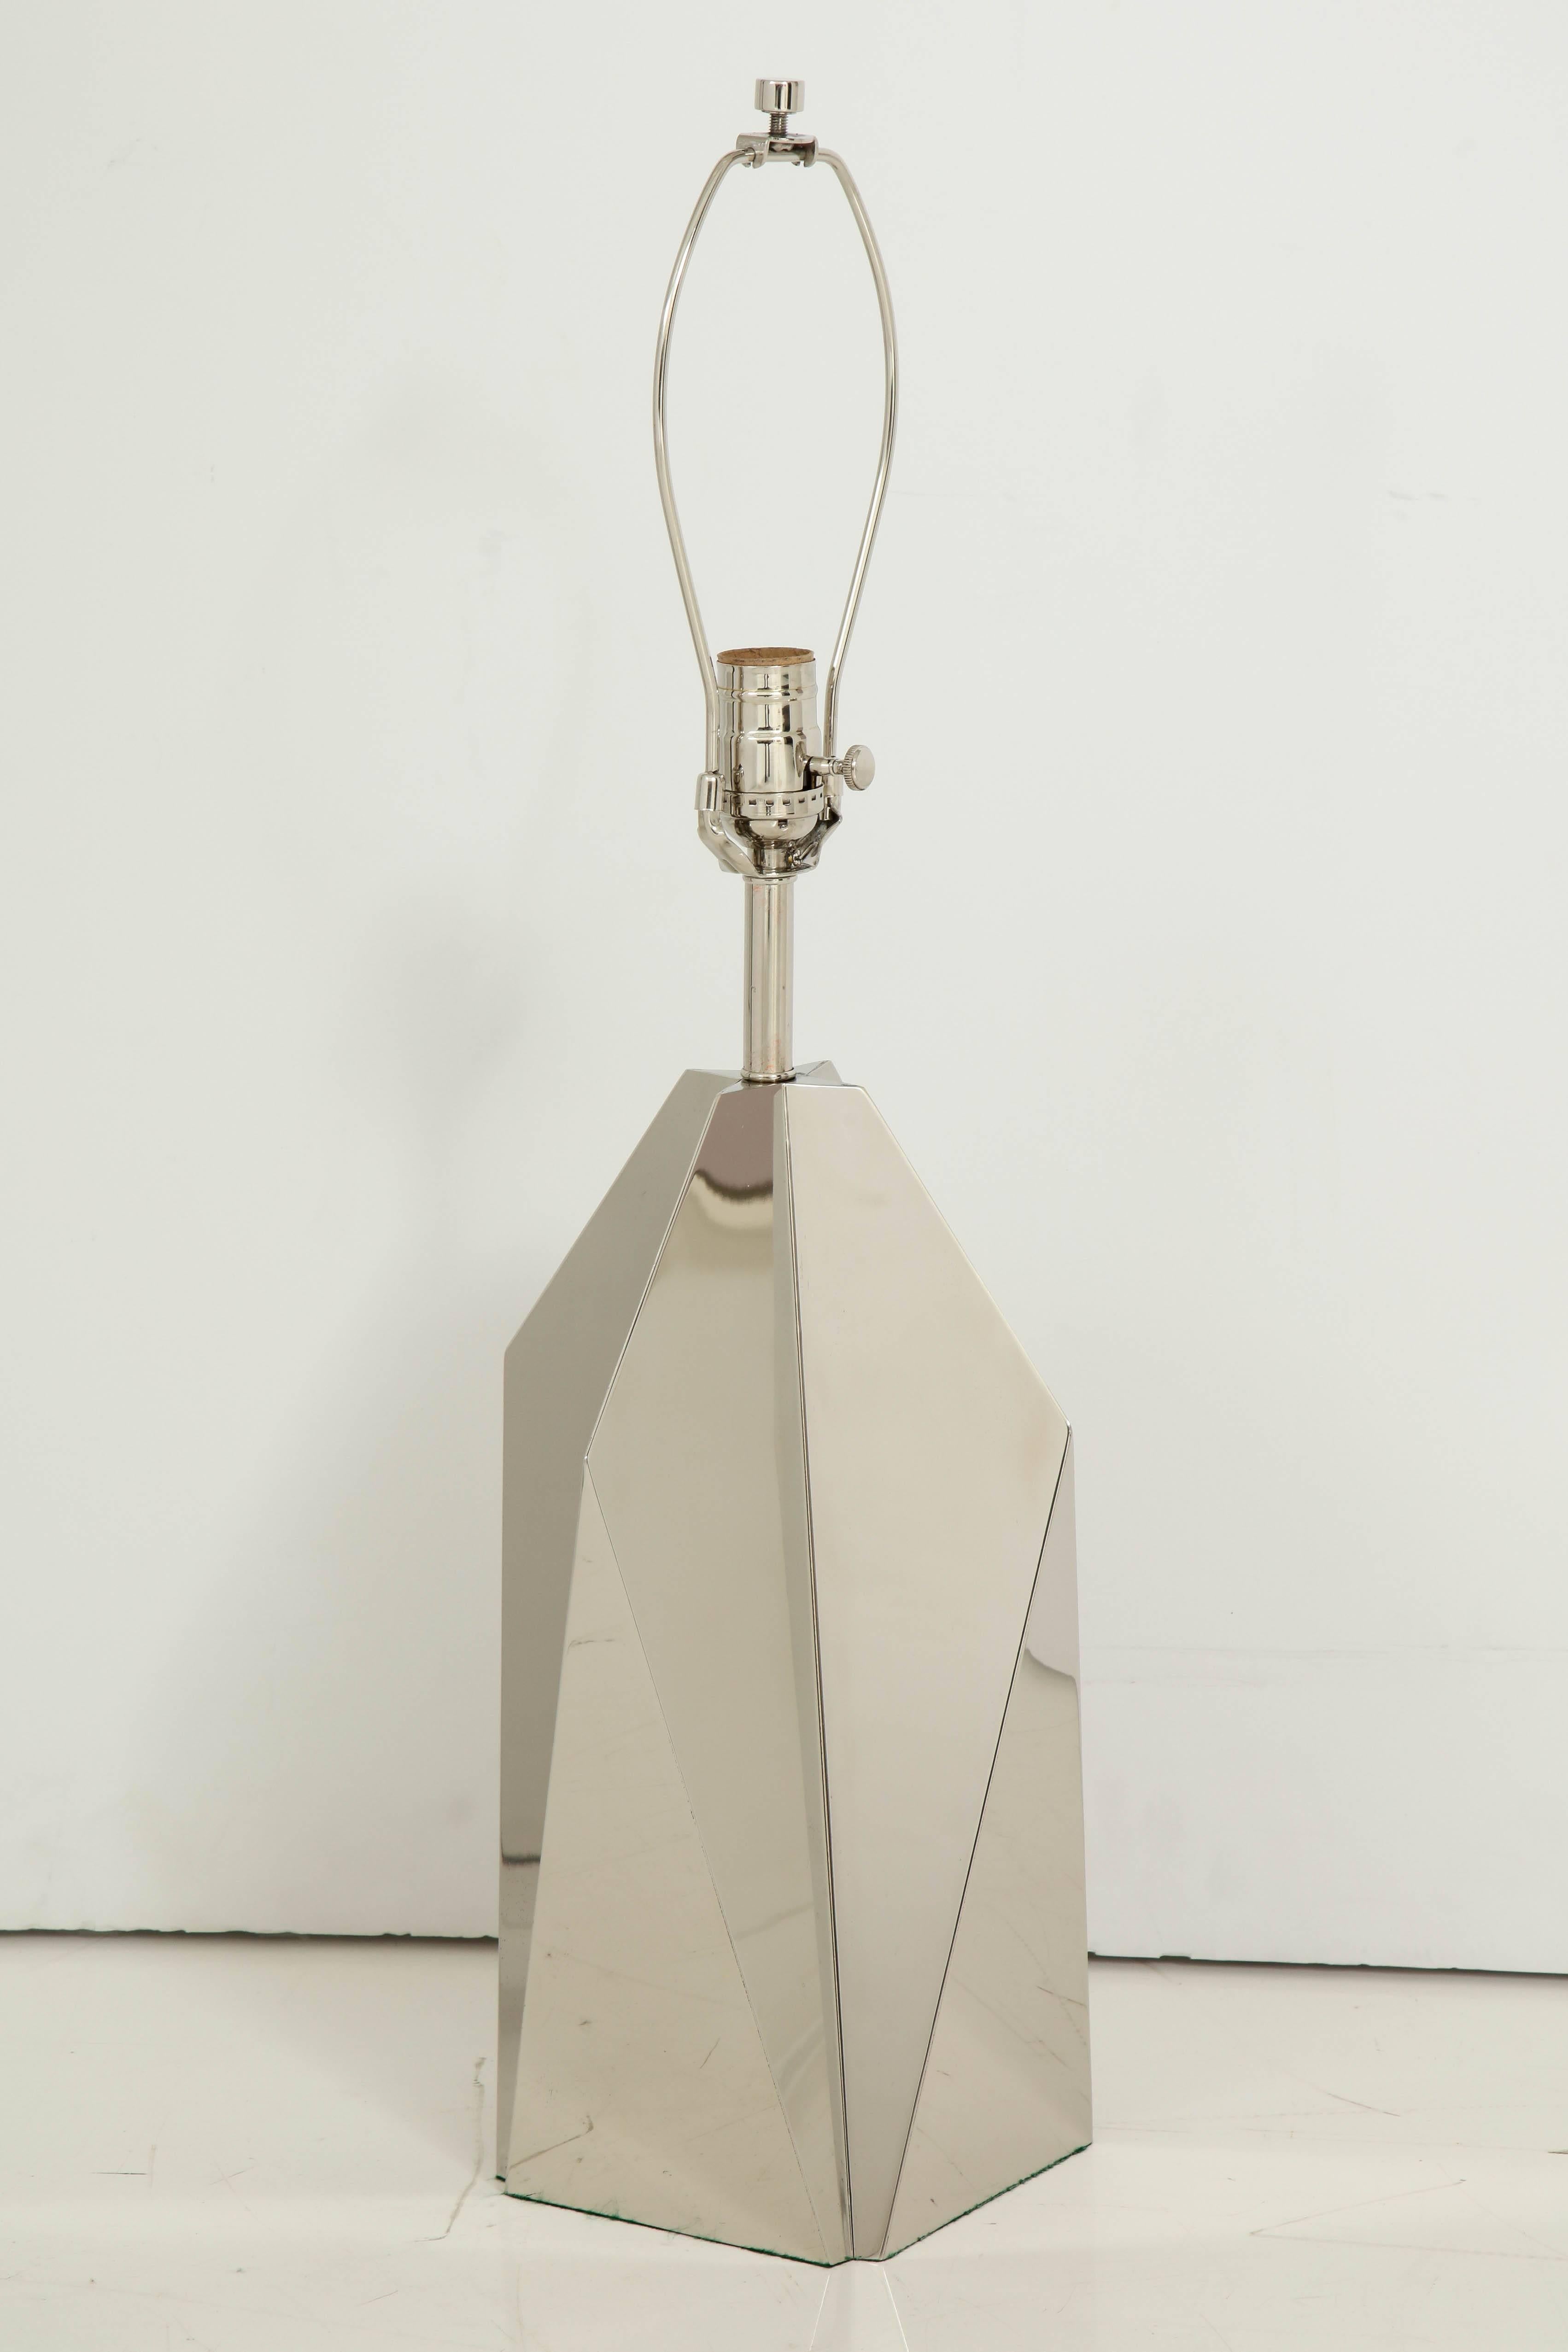 American Jere, Origami, Chrome Lamps, 1970